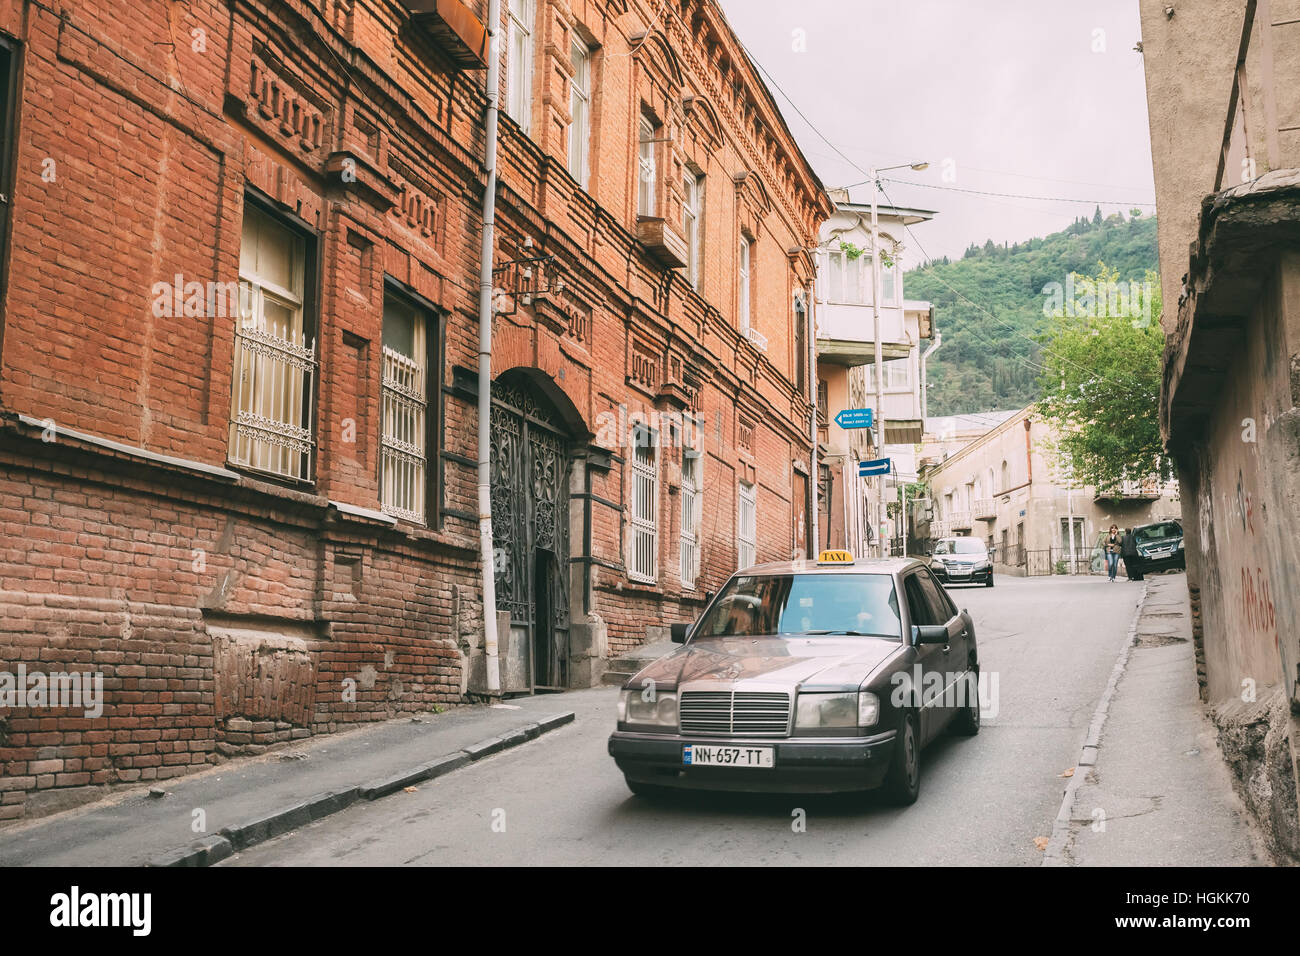 Tbilisi, Georgia - May 20, 2016: The View Of Moving Gray Mercedes Benz, Taxi Car On Narrow Besik Street Between Old Buildings In Spring Day Under Somb Stock Photo